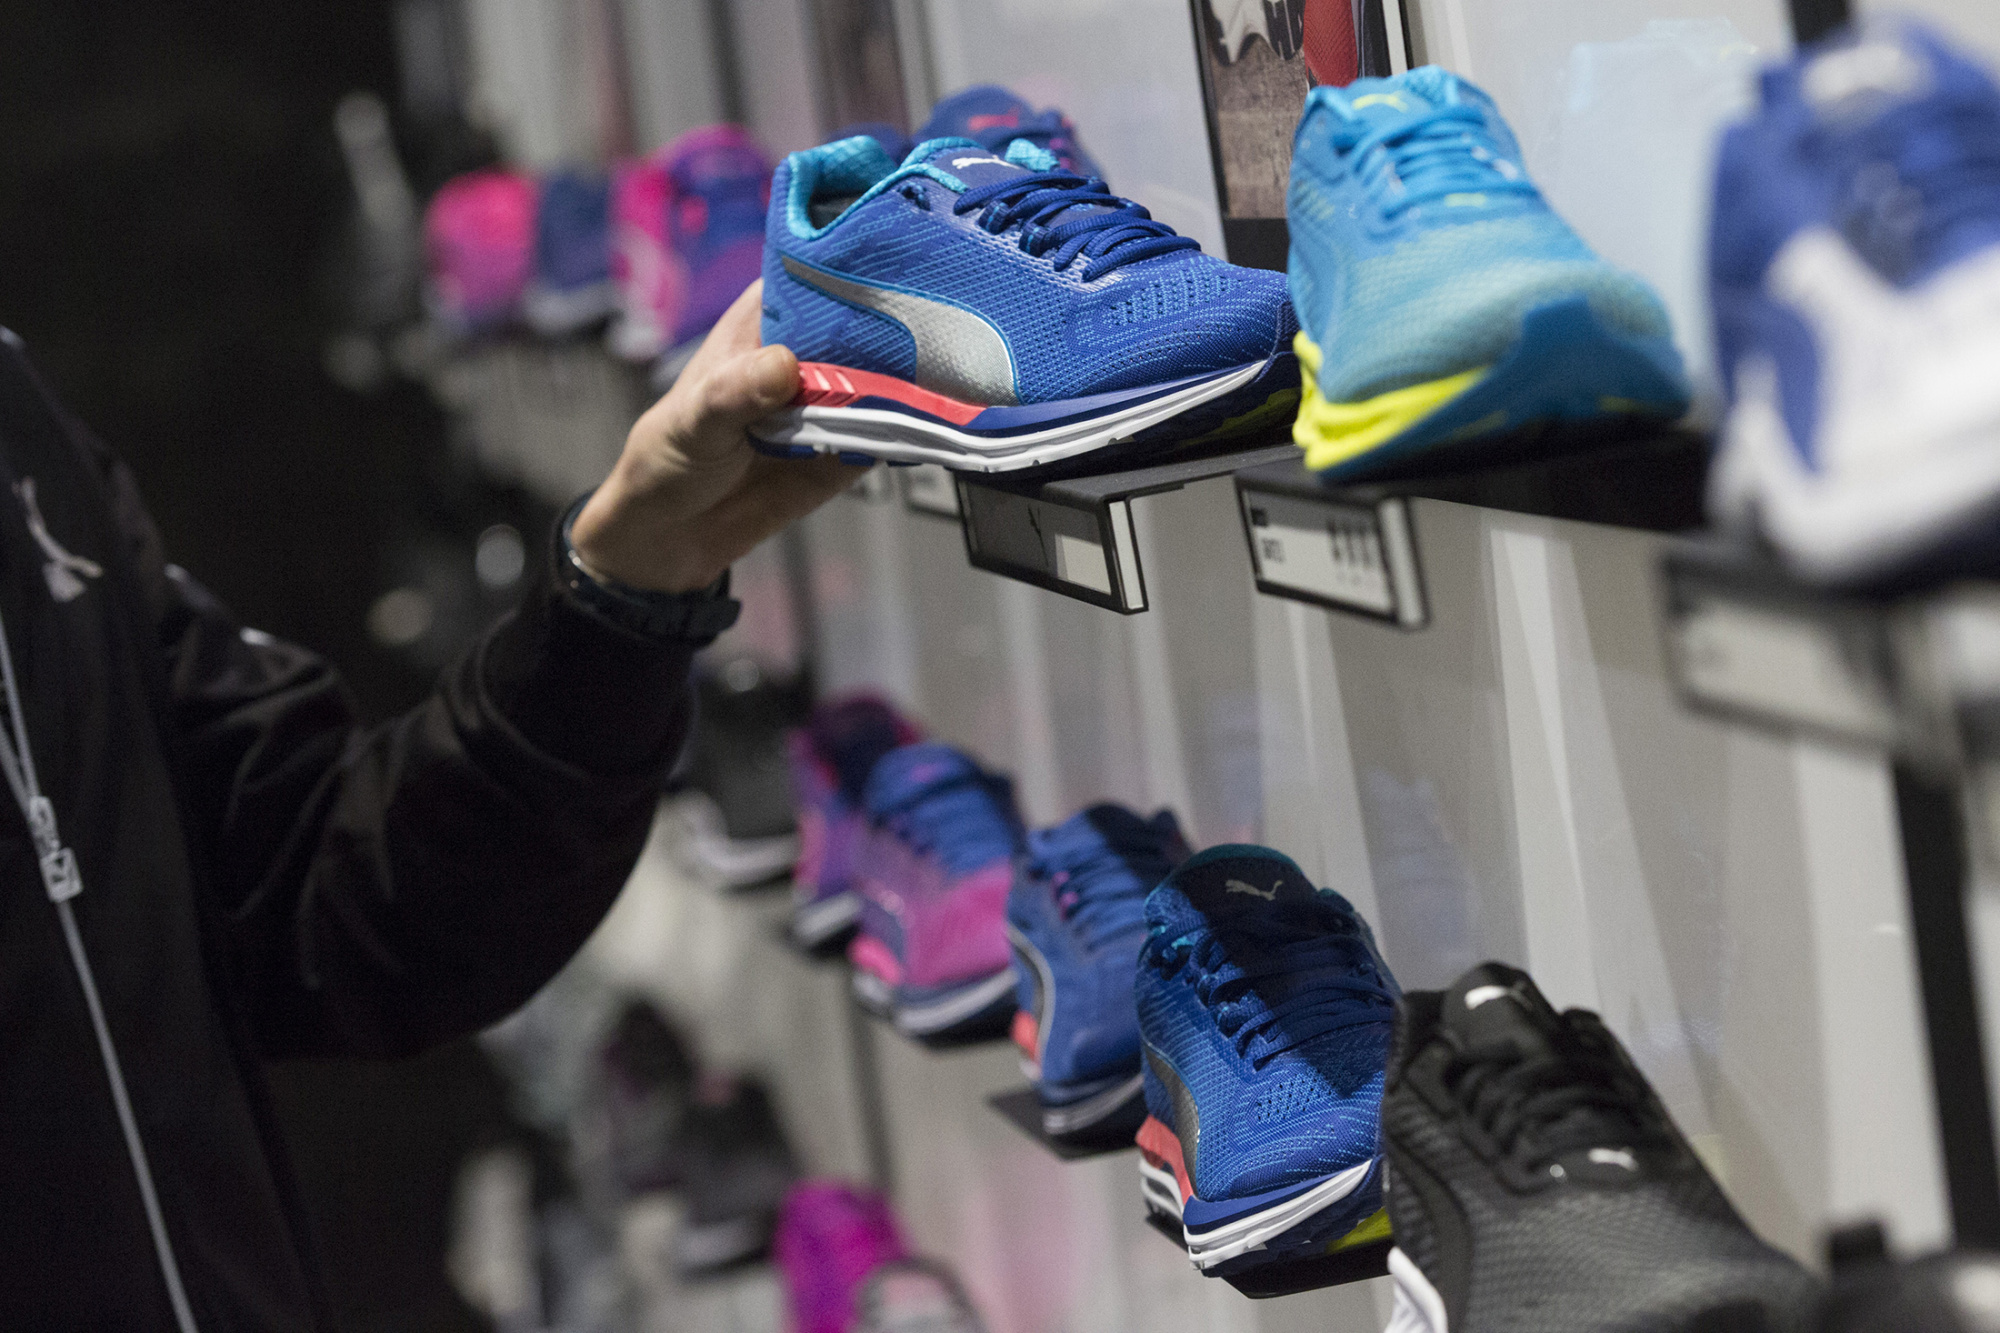 Kering Pares Back Its Puma Shares to Focus on Luxury Goods - Bloomberg